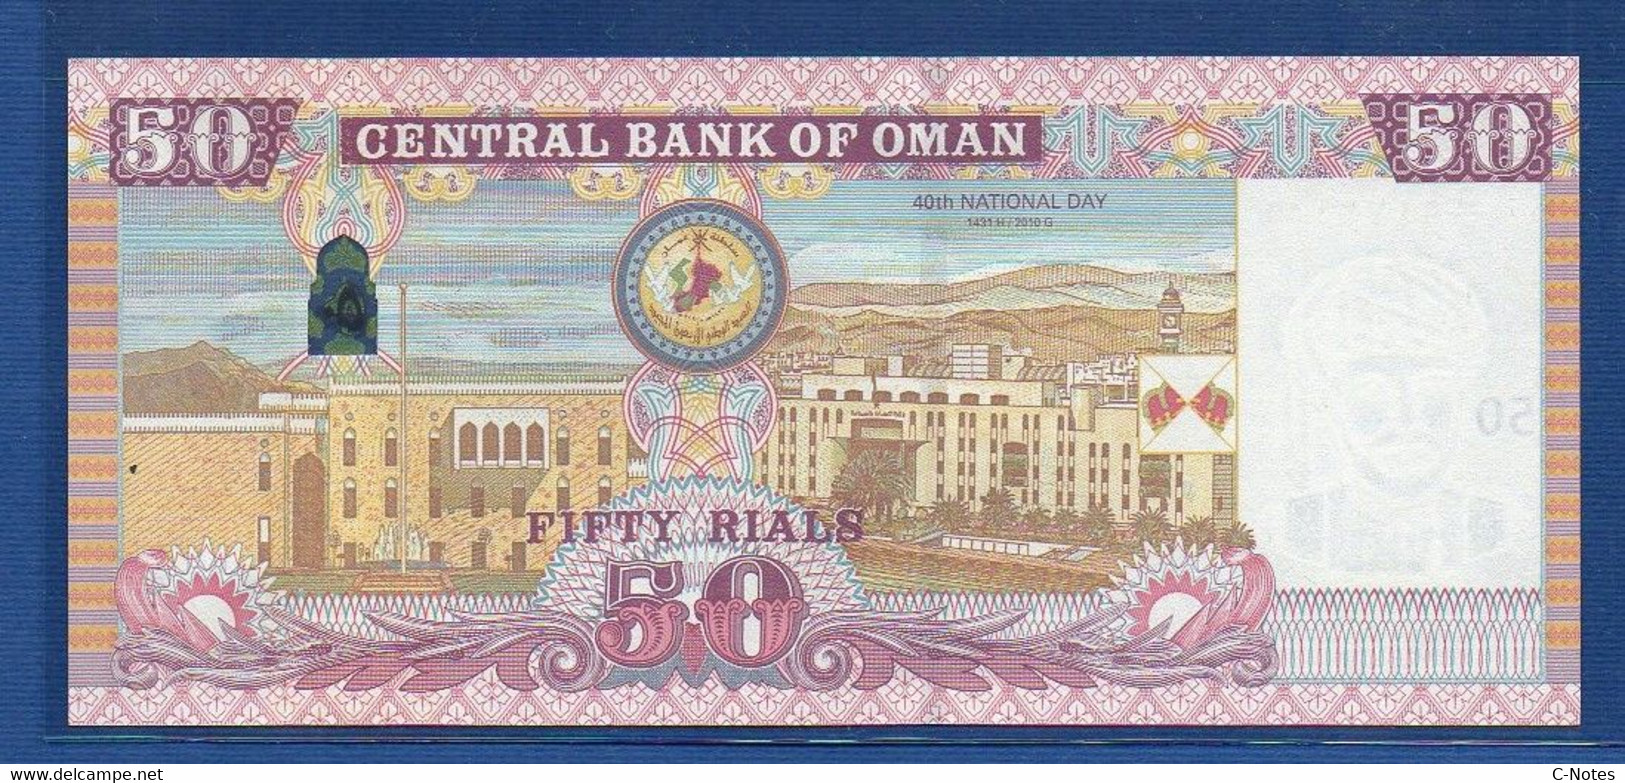 OMAN  - P.47a1 – 50 Rials 2010 UNC See Photos, "40th National Day" Commemorative Issue - Oman